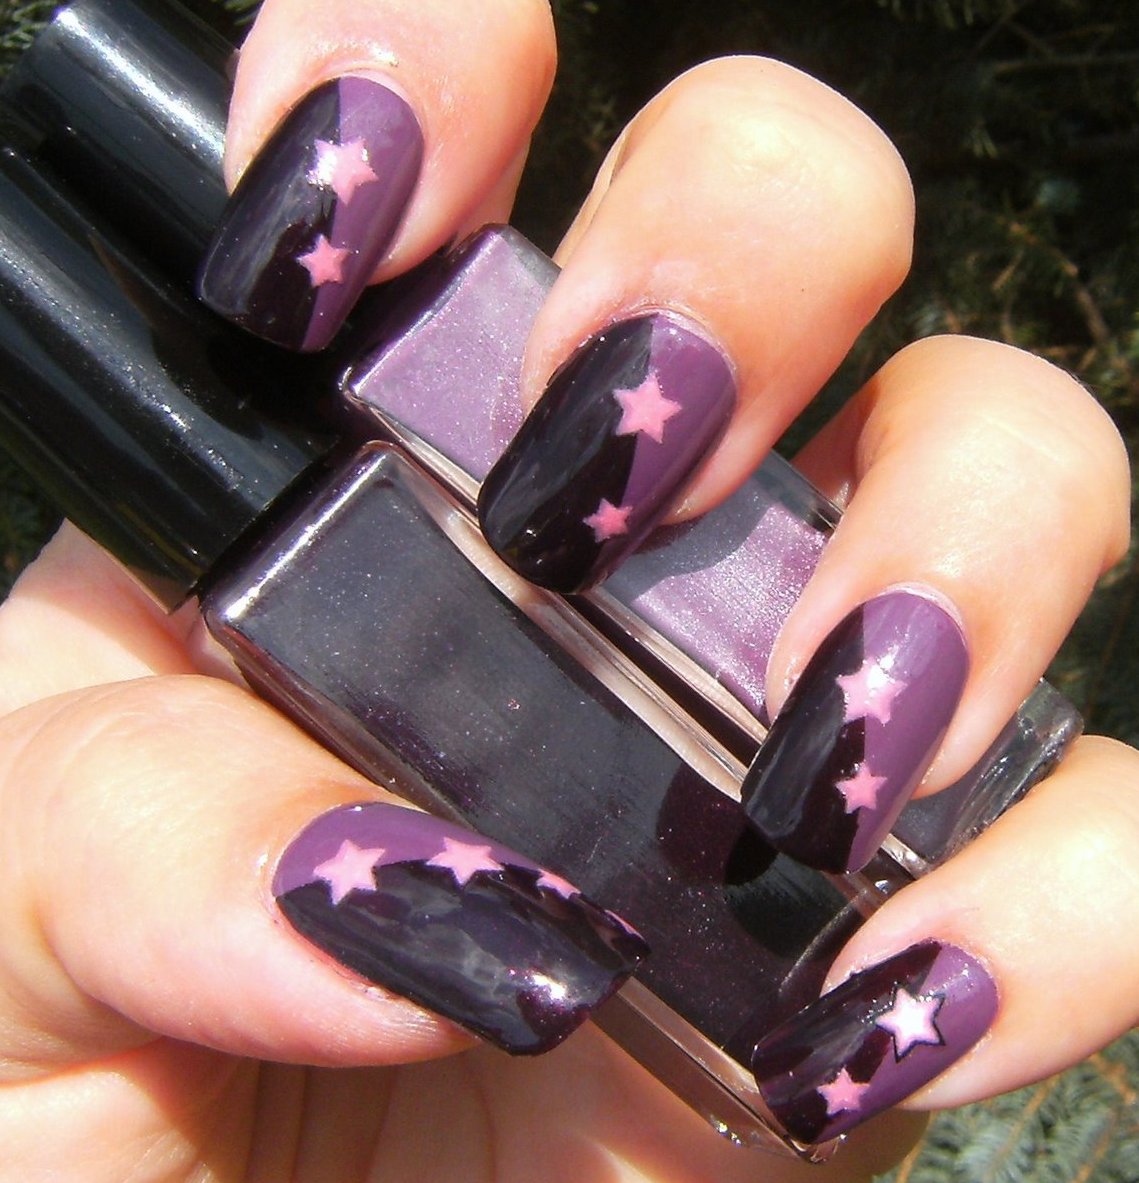 nice picture of nail art